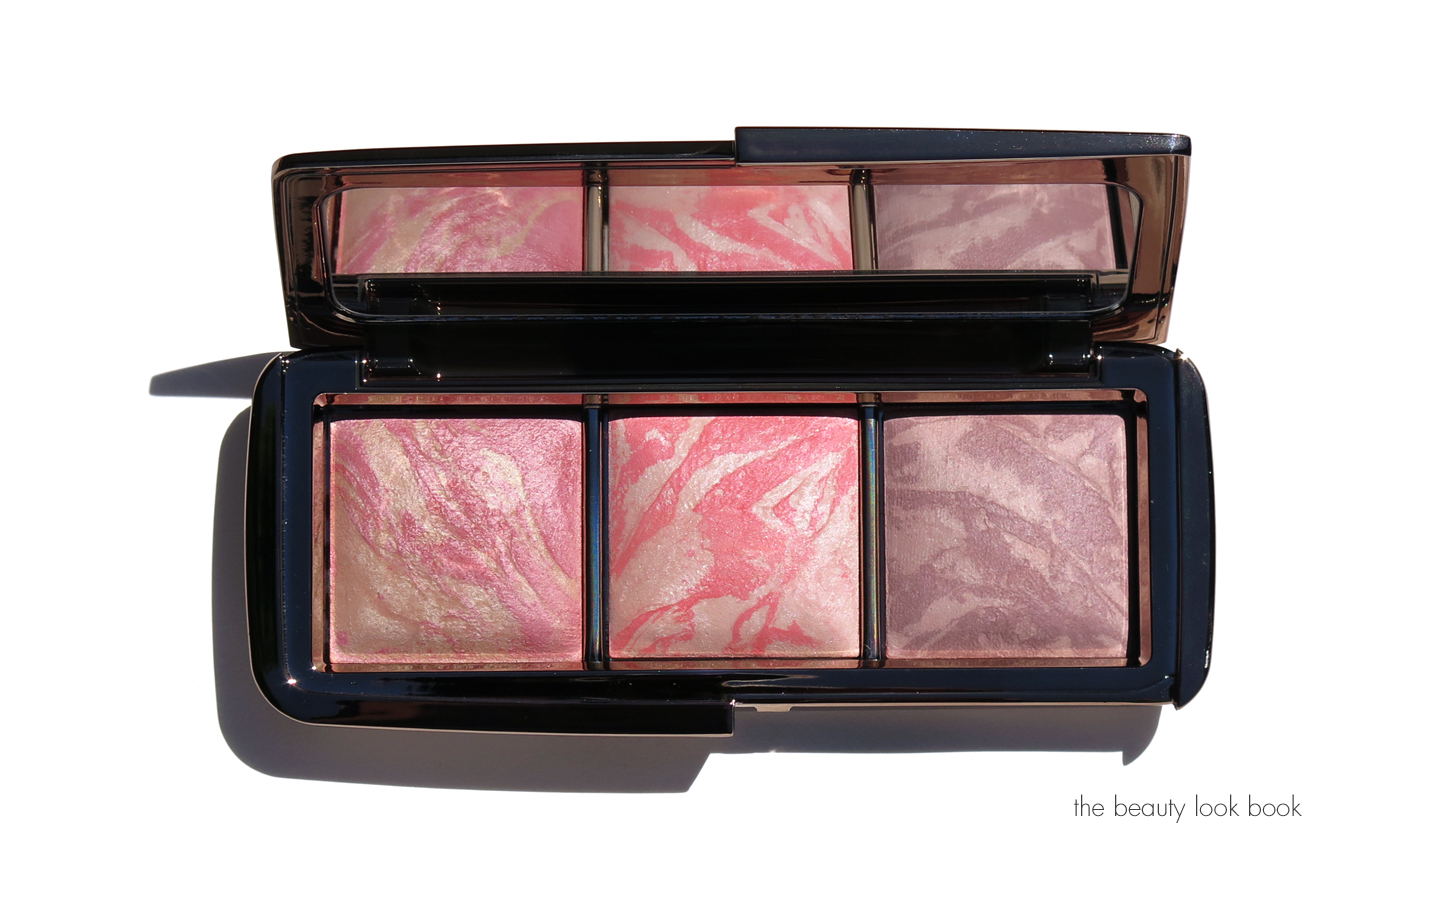 Hourglass Ambient Lighting Blush Palette - The Book